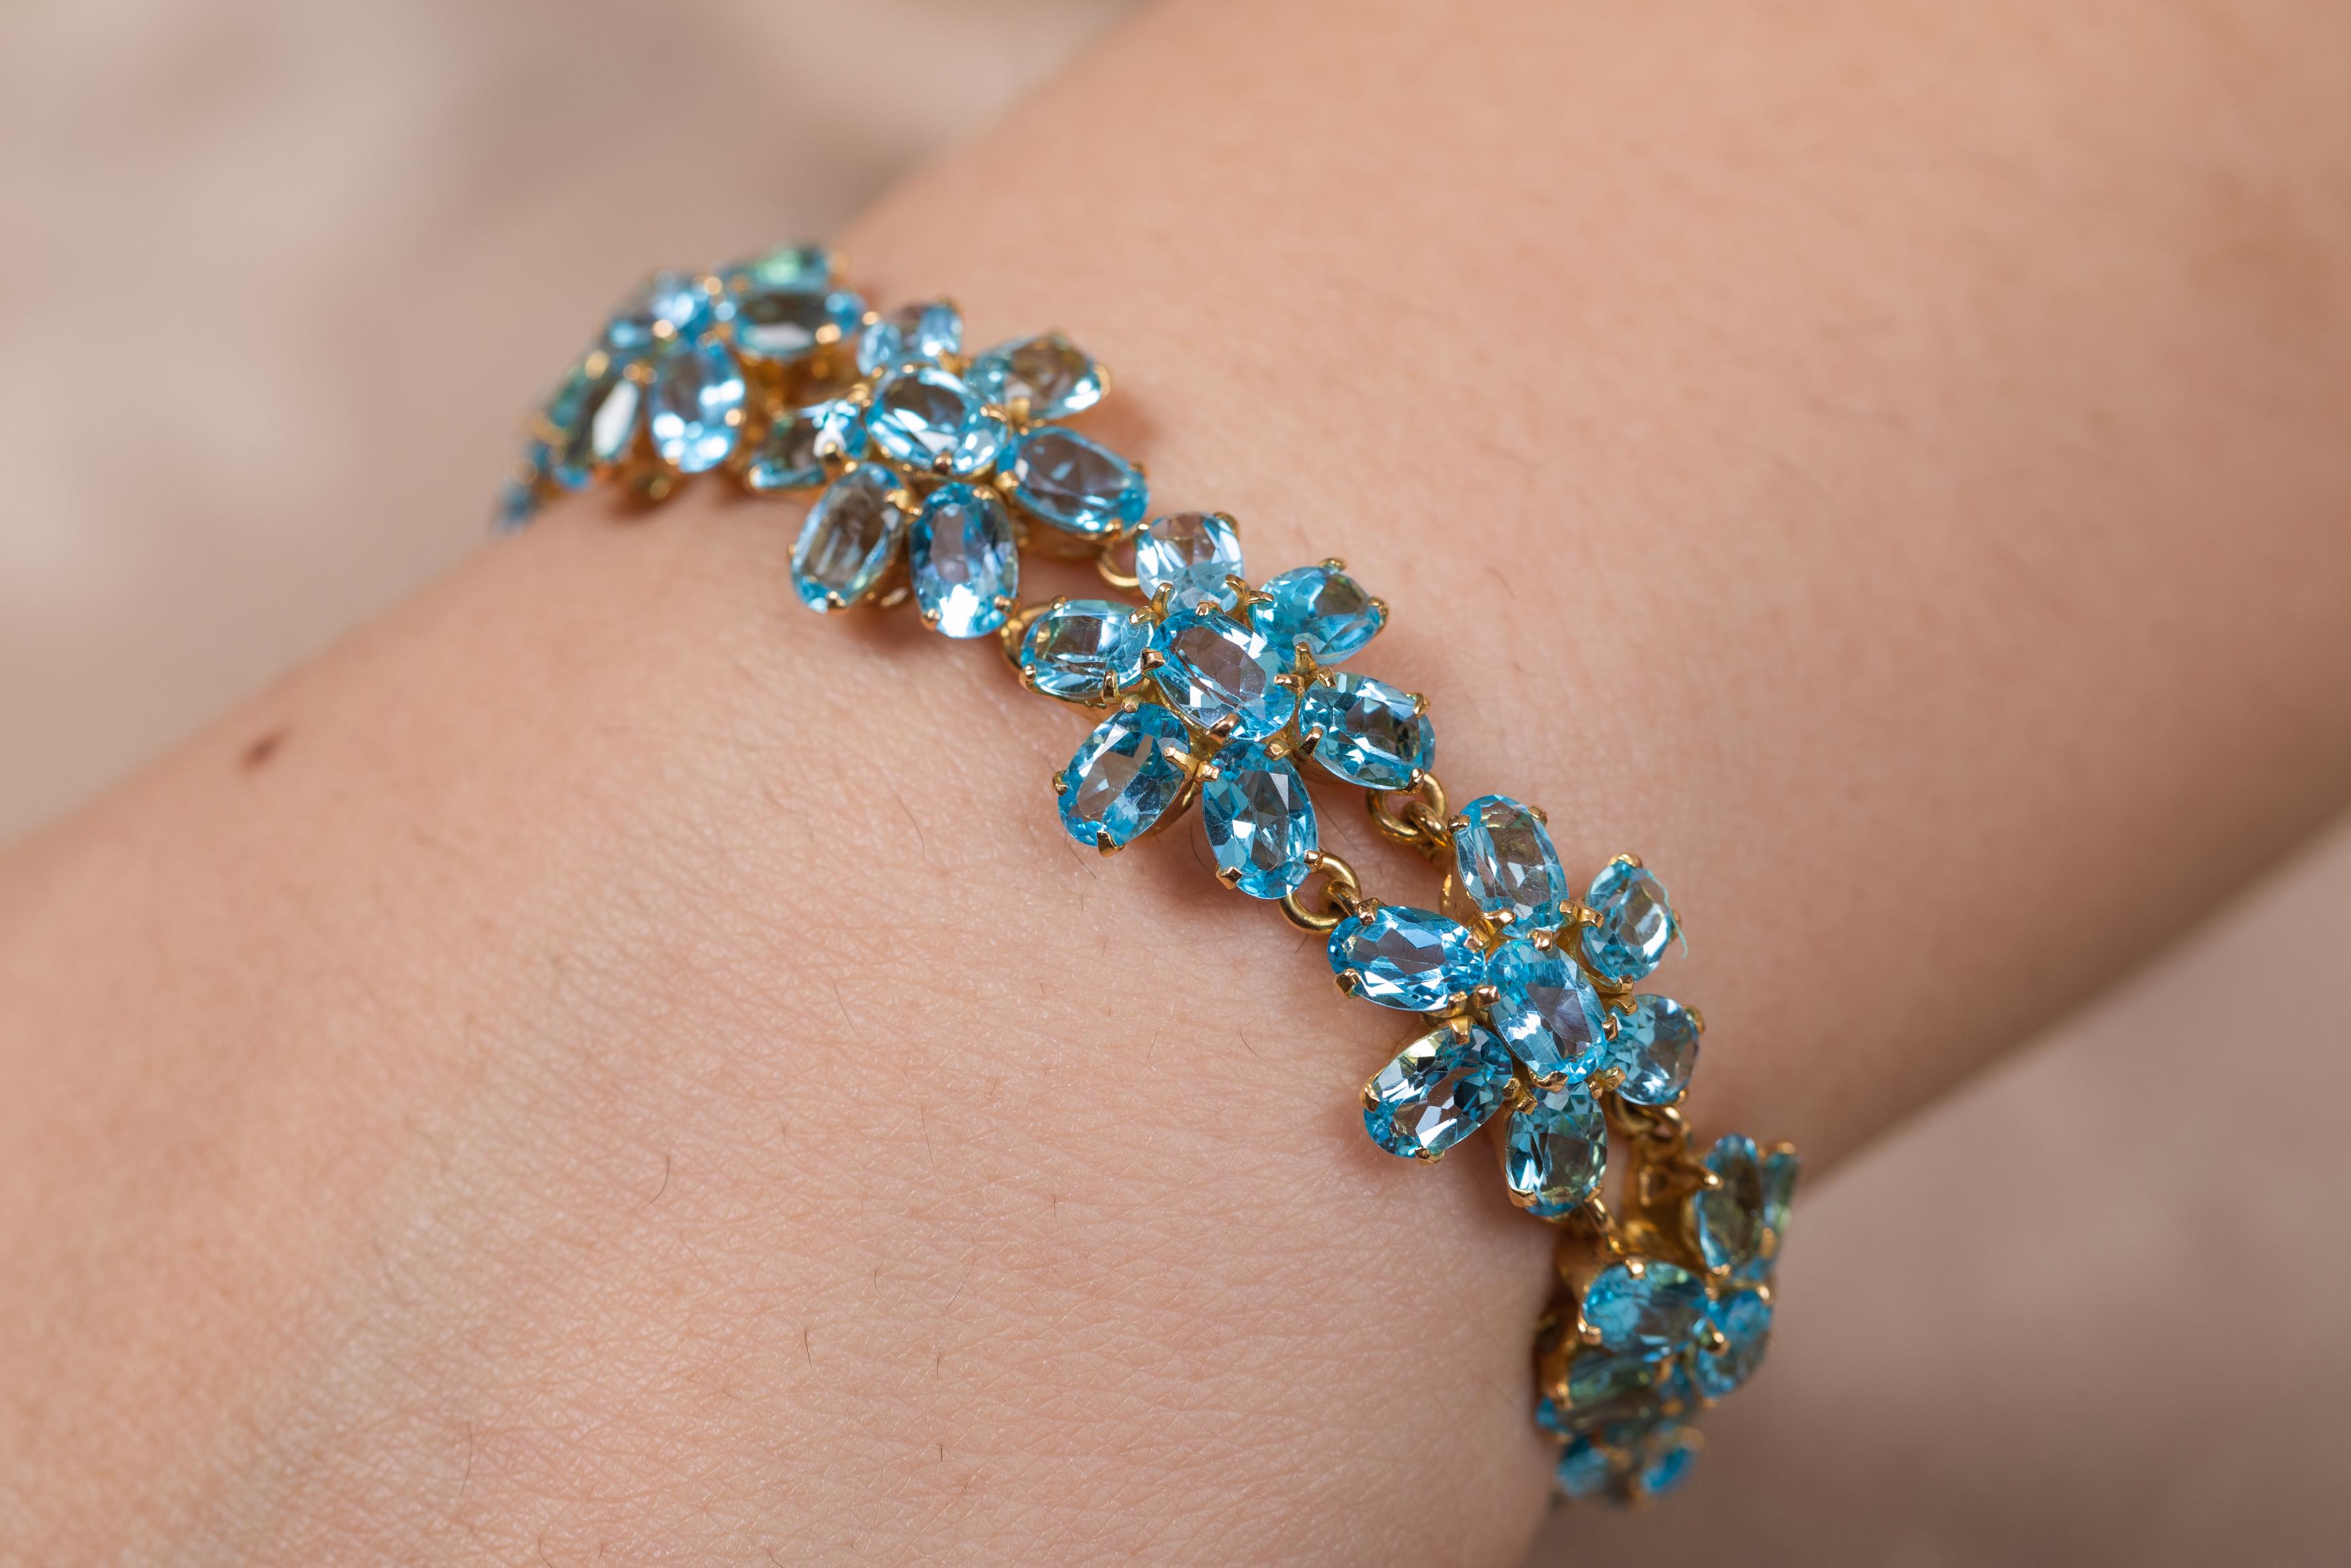 This Blue Topaz Floral Bracelet in 18K gold showcases 77 endlessly sparkling natural blue topaz, weighing 38.1 carats. It measures 7.5 inches long in length. 
Topaz improves communication and expression. 
Designed with perfect oval cut blue topaz